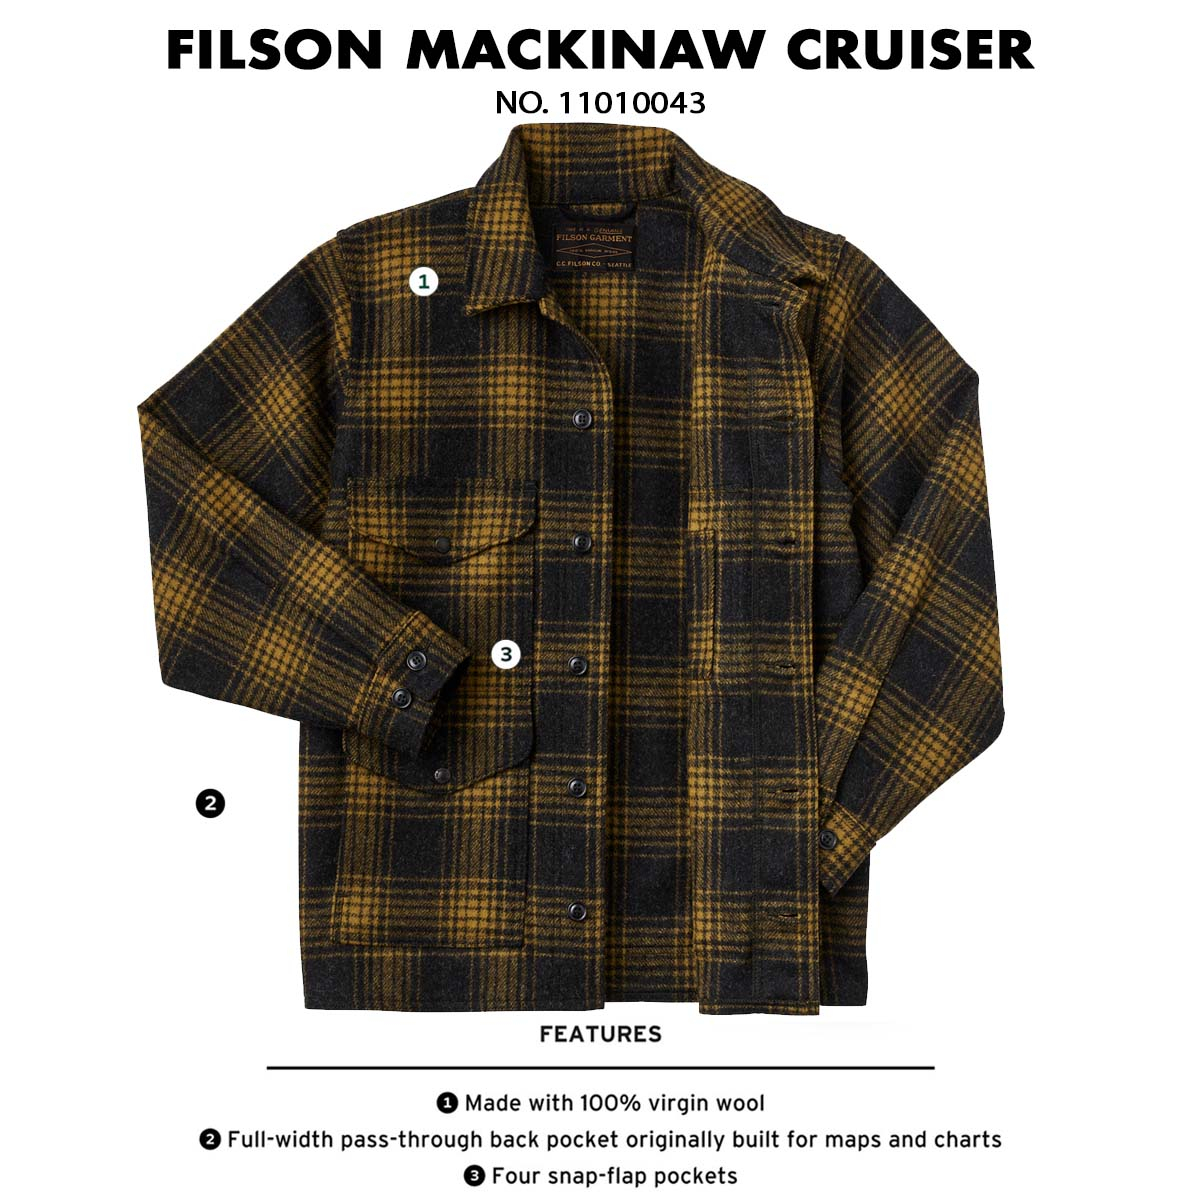 Filson Mackinaw Wool Cruiser Jacket Gold Ochre Omber, Made of 100% virgin Mackinaw Wool for comfort, natural water-repellency and insulating warmth in any weather conditions.